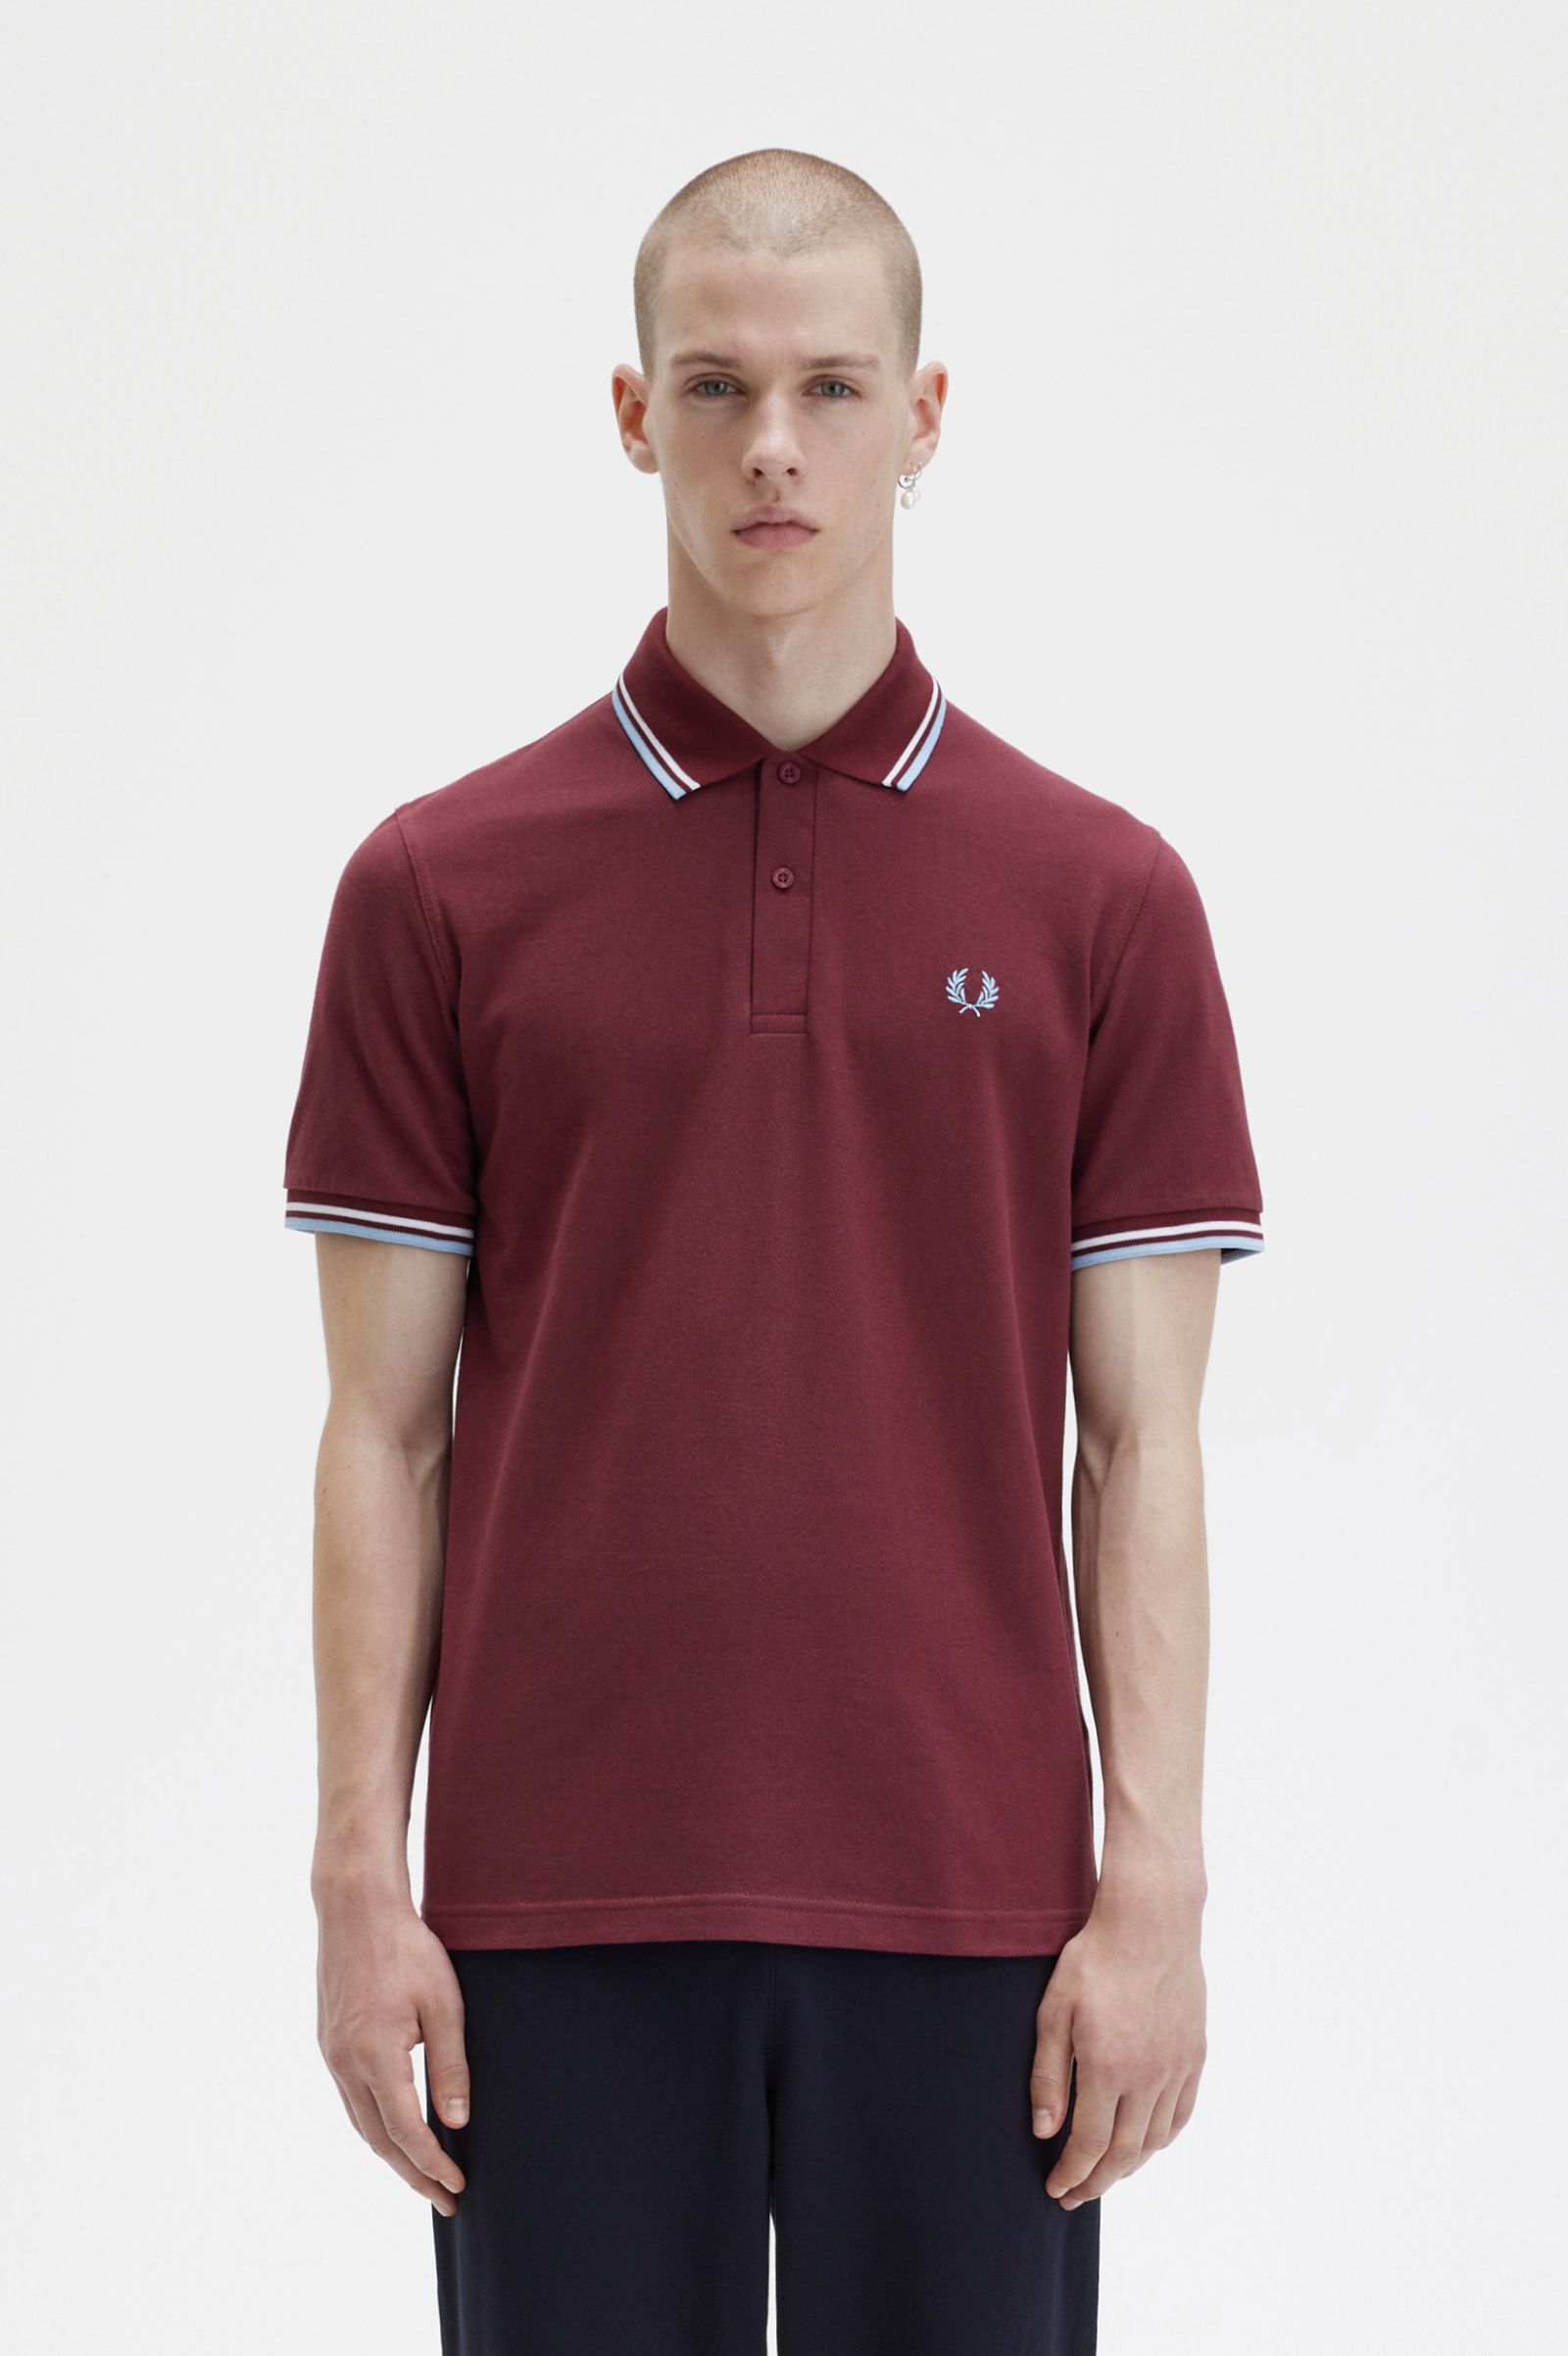 M12 - Maroon / White Ice The Fred Perry Shirt | Men's Short & Long Sleeve Shirts | Fred Perry US